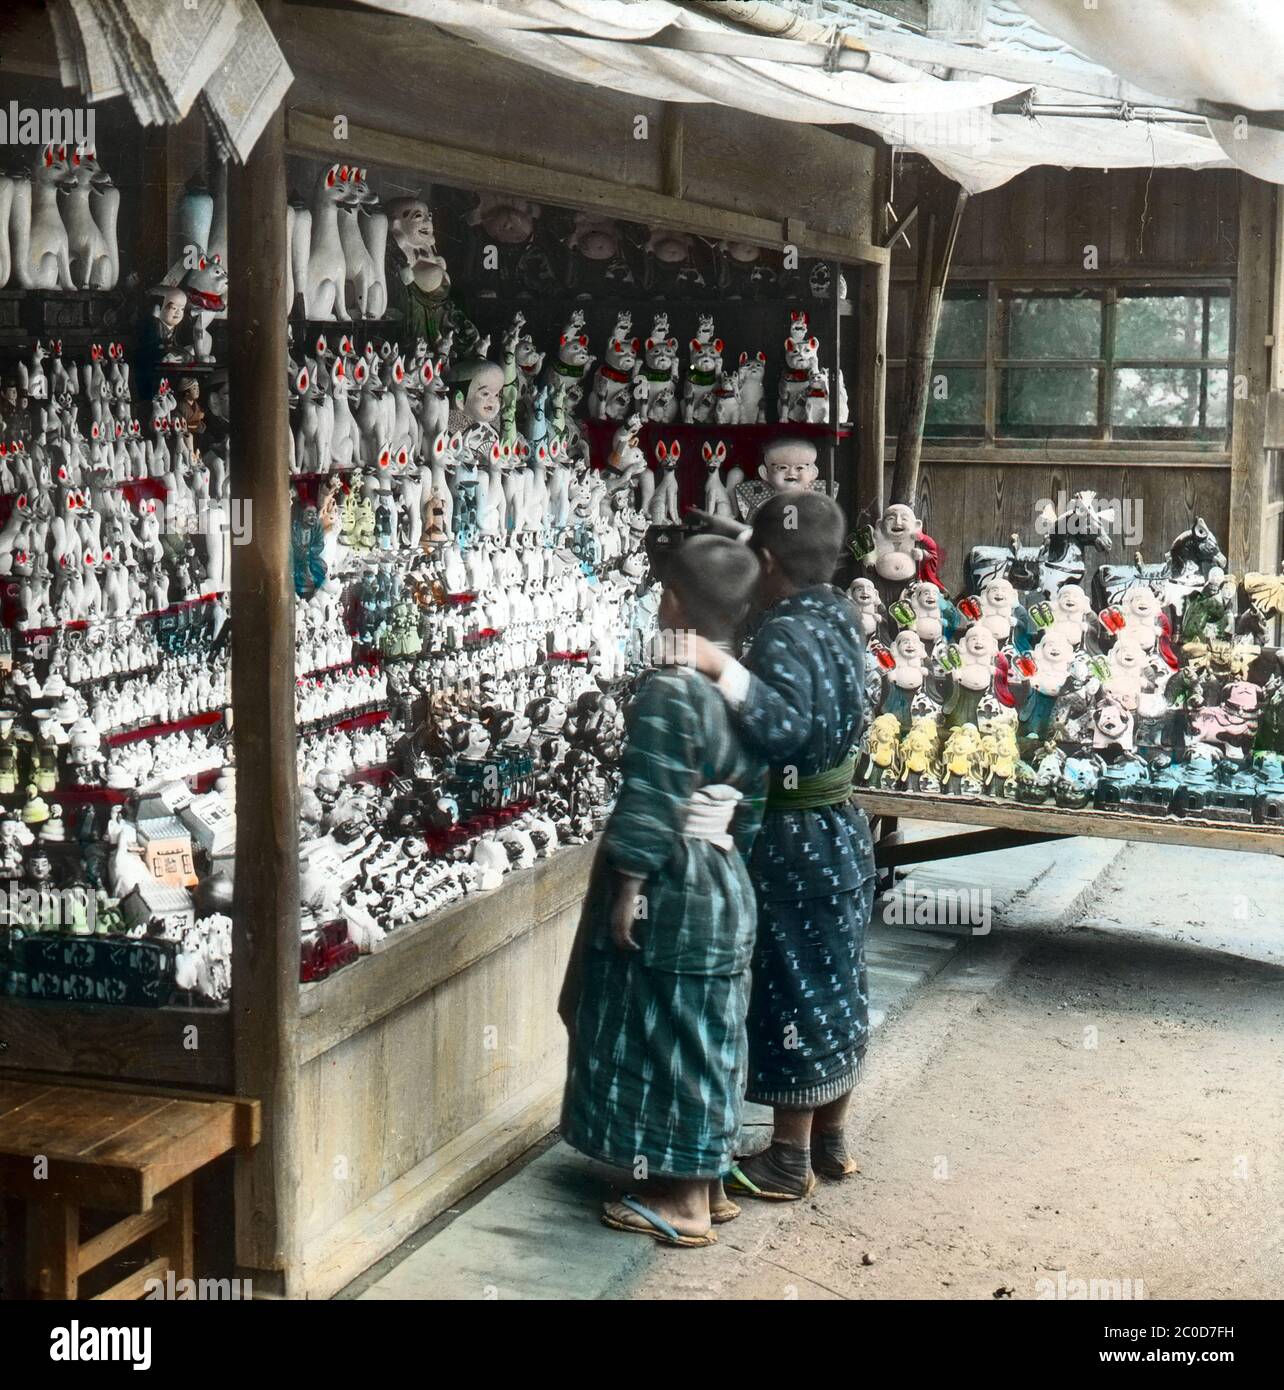 [ 1900s Japan - Japanese Porcelain Shop ] — Two boys look at a display of porcelain dolls and figures at a souvenir shop at Fushimi Inari Taisha, the head shrine of Inari, located in Fushimi-ku, Kyoto.   Most of them are foxes, which are prominent symbols of Inari Okami (稲荷大神), one of the principal kami (deity,  divinity, spirit) of Shinto.  20th century vintage glass slide. Stock Photo